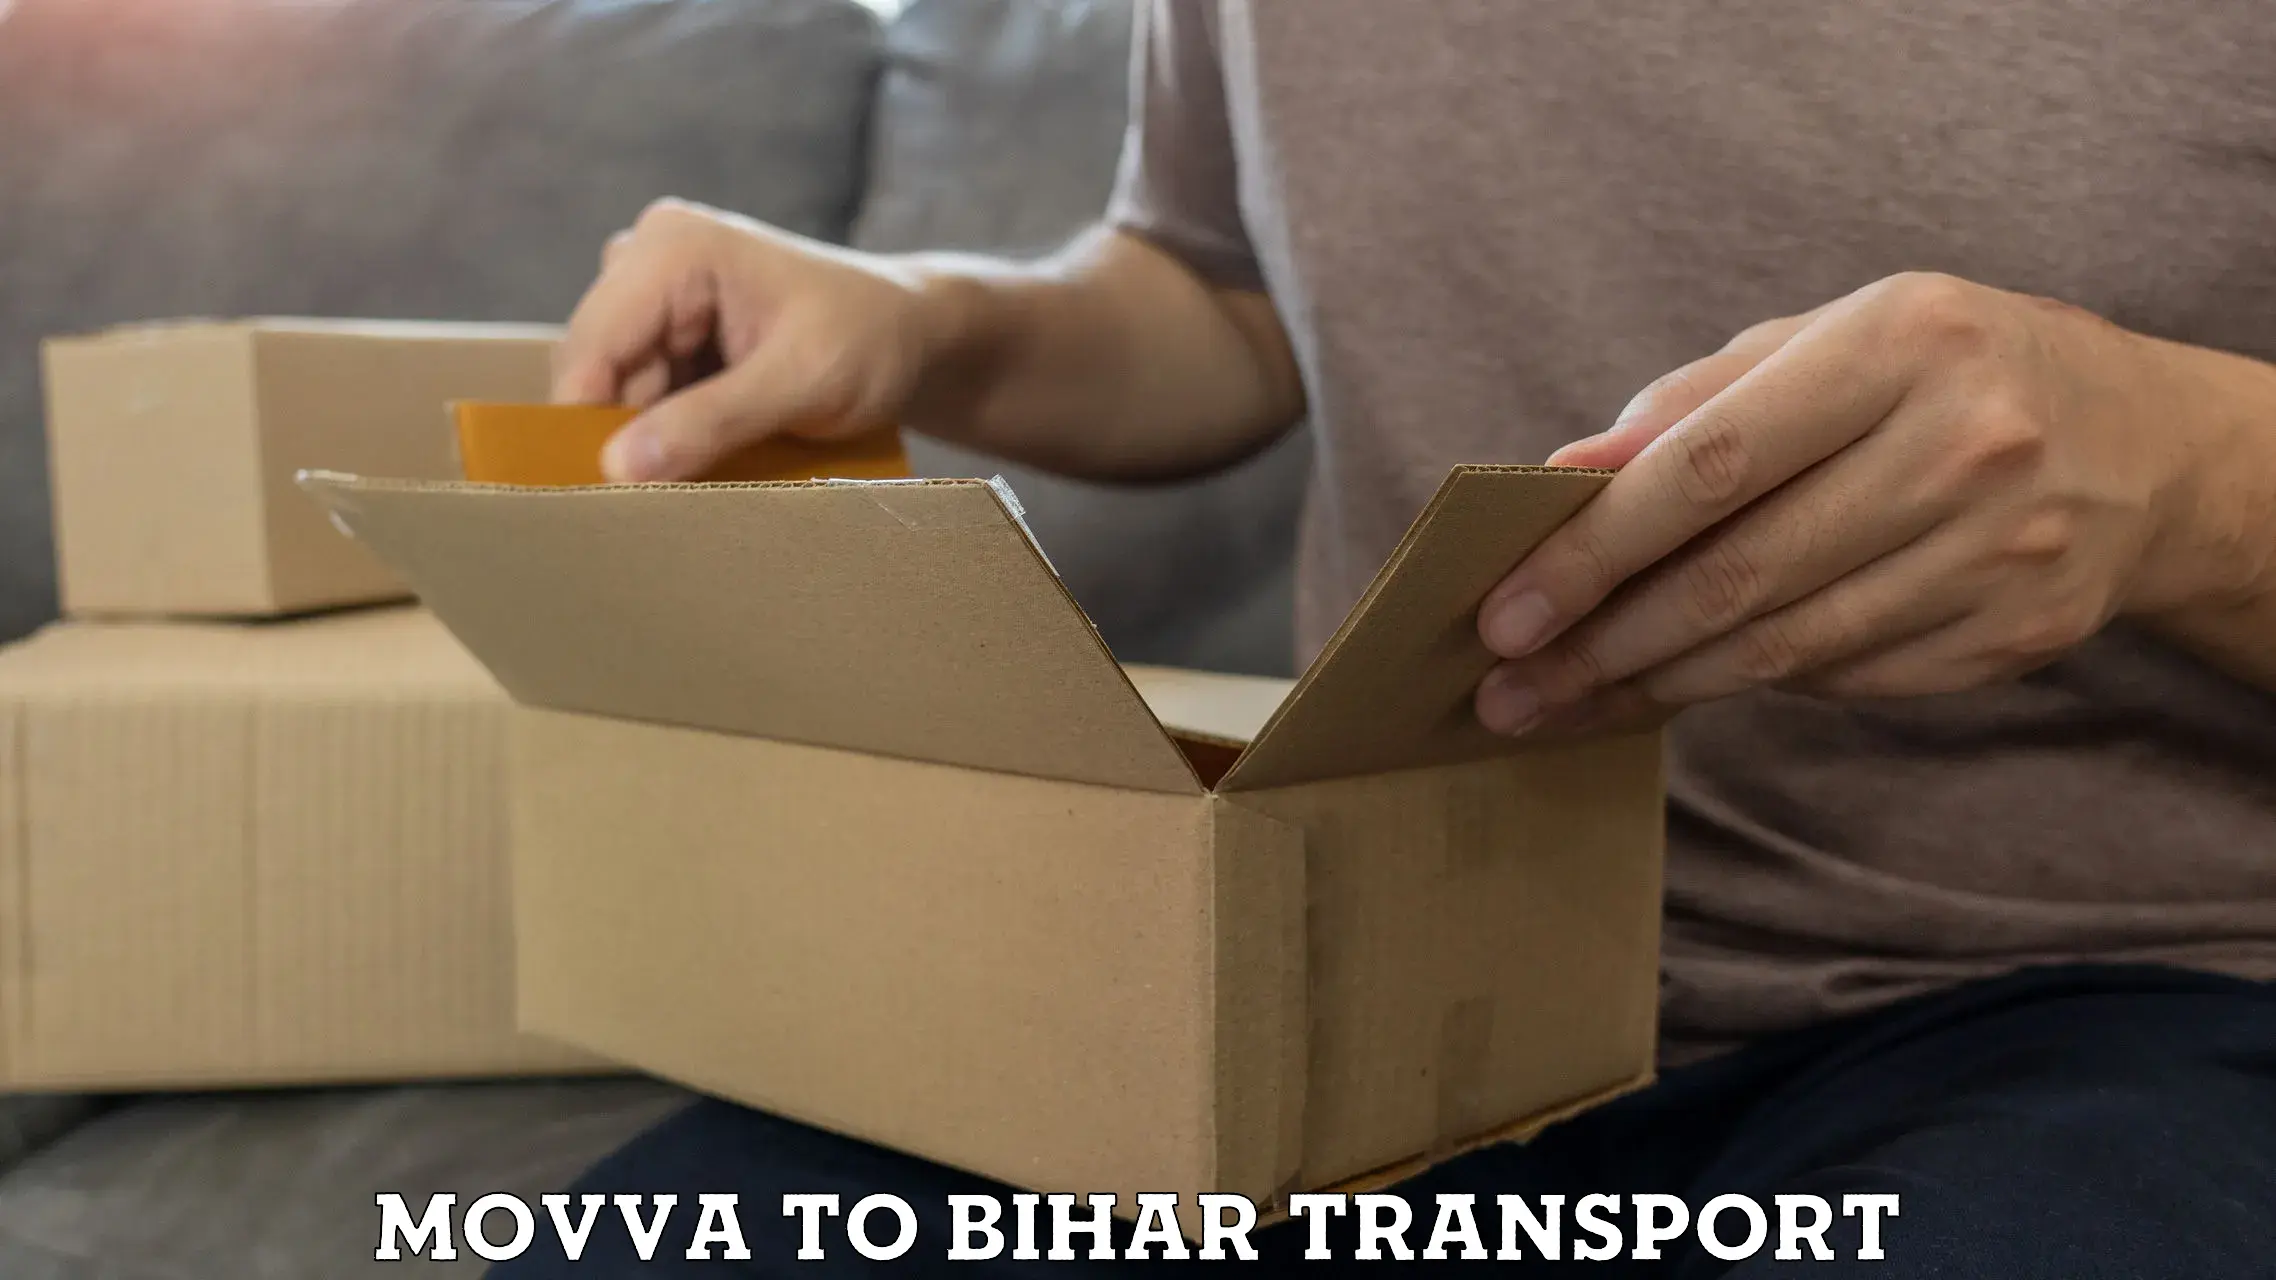 Transport bike from one state to another Movva to Jhajha